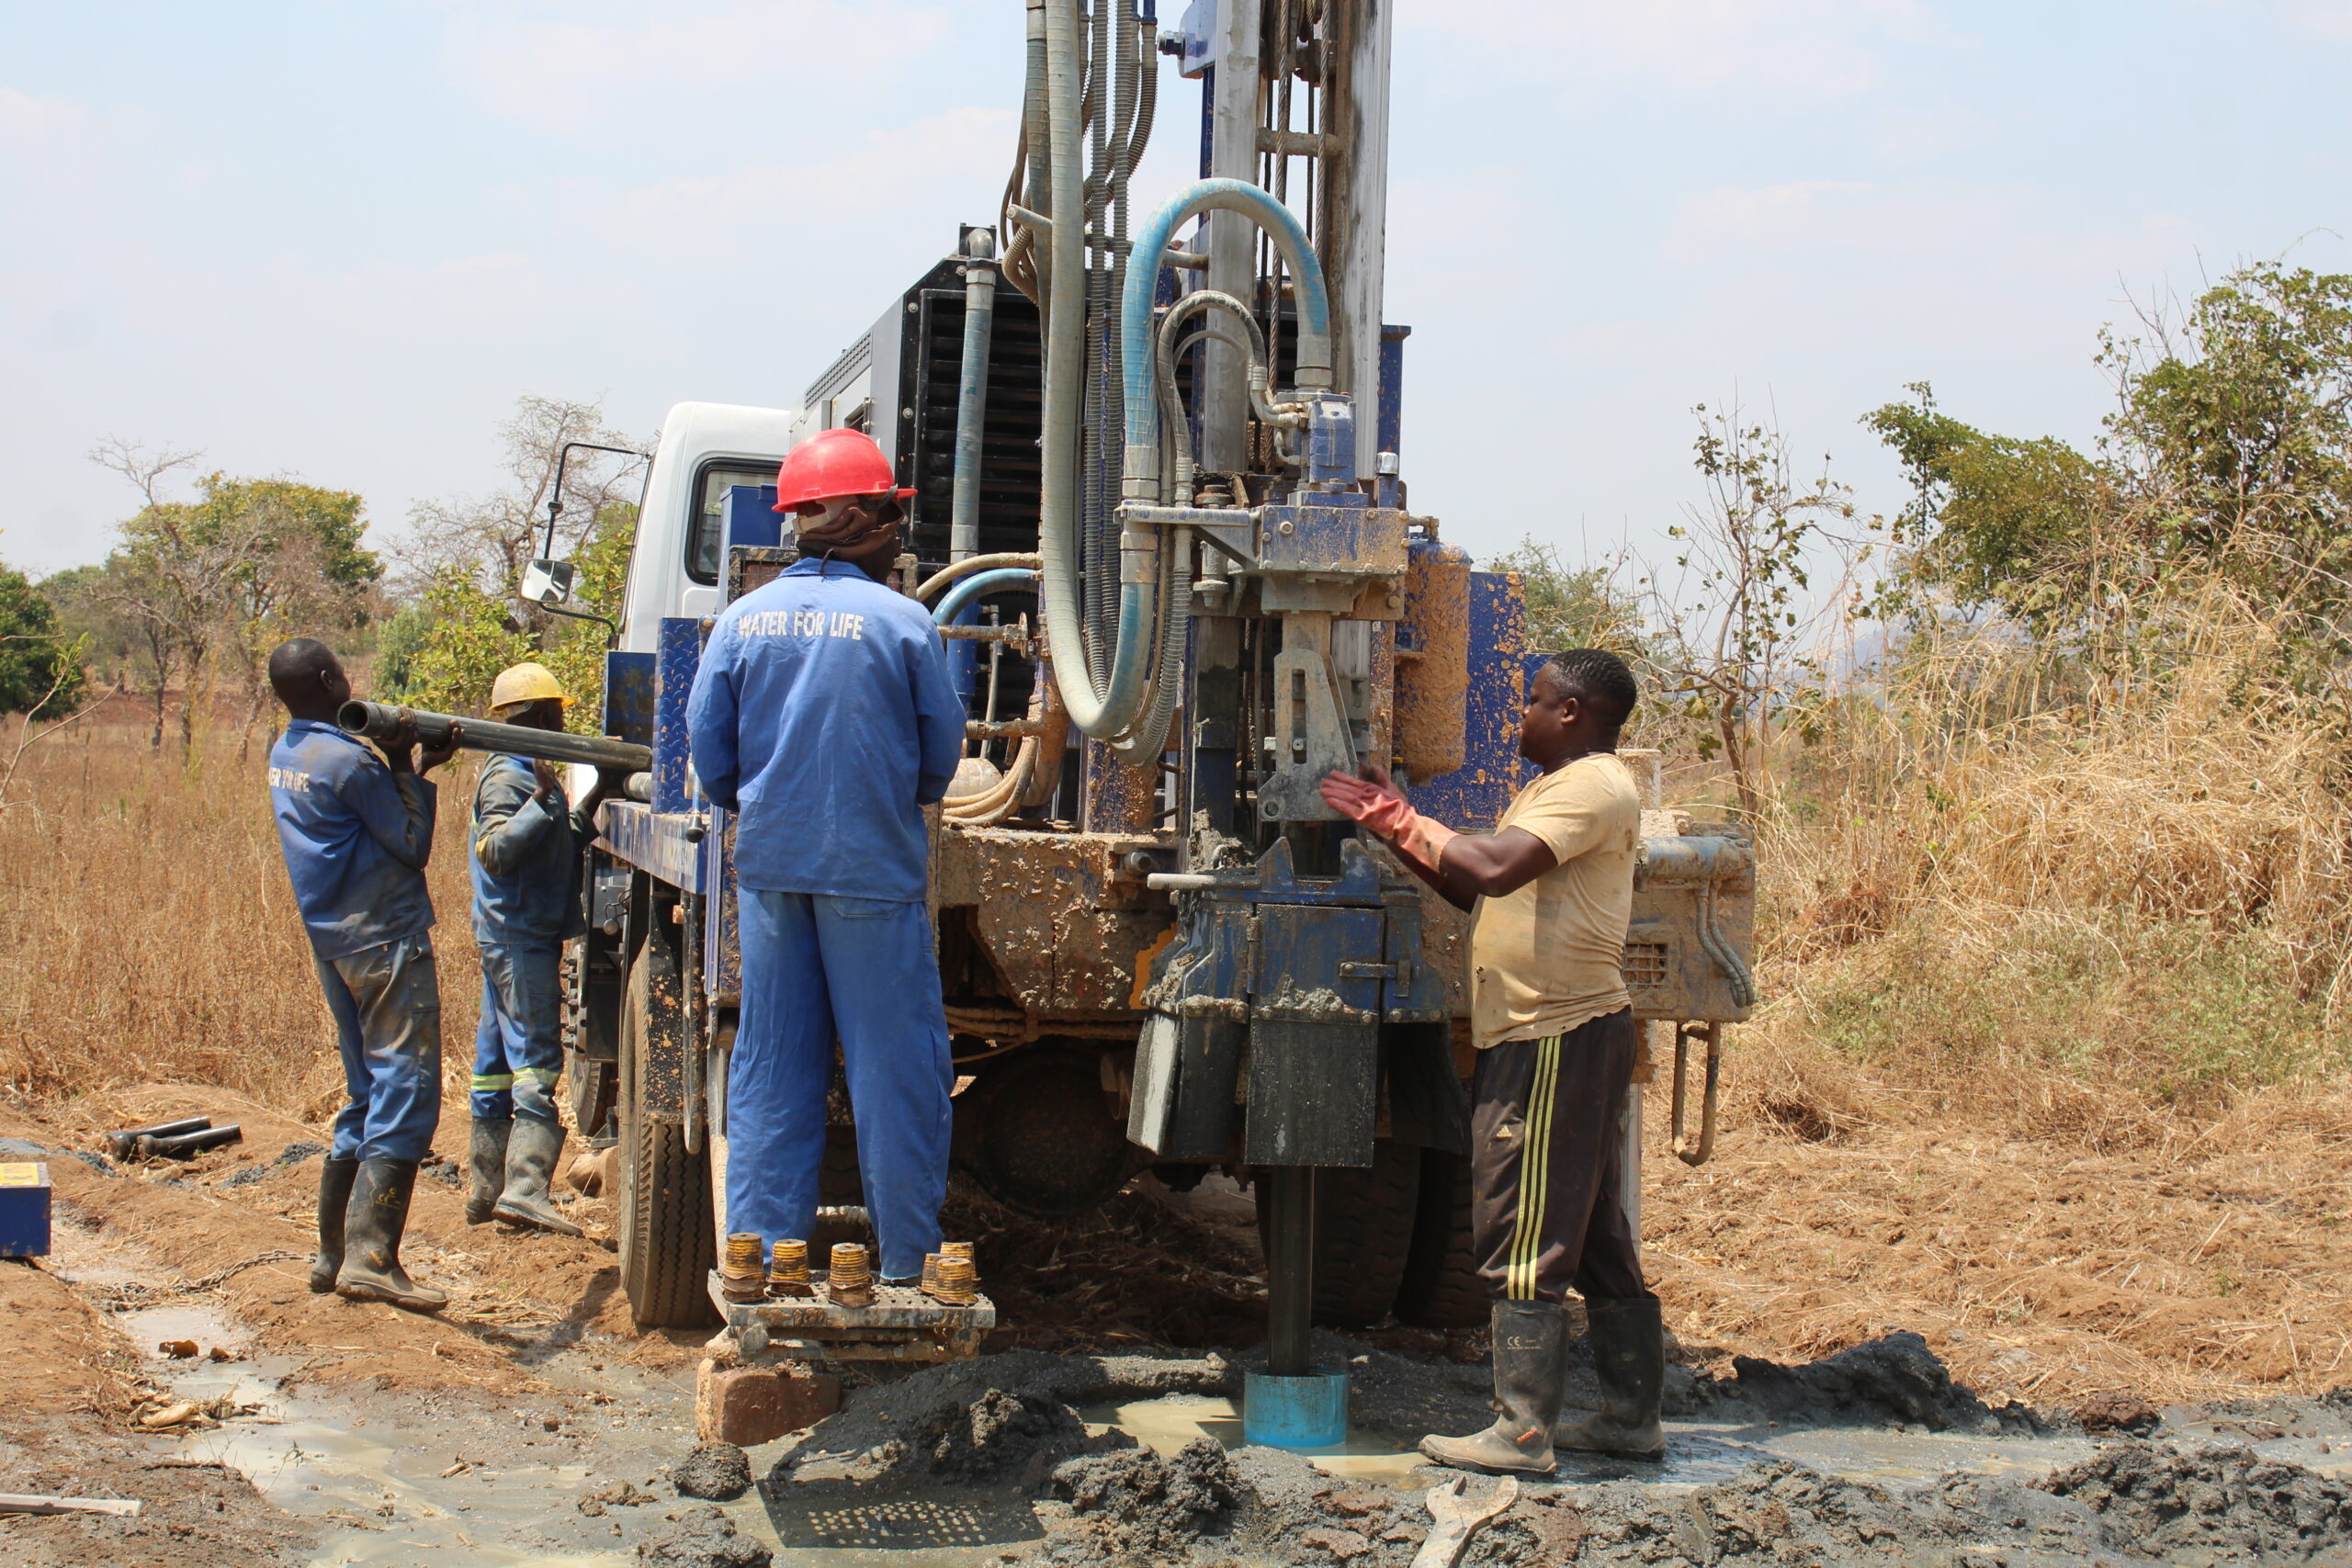 The Challenge of Accessing Clean Water in Rural Malawi